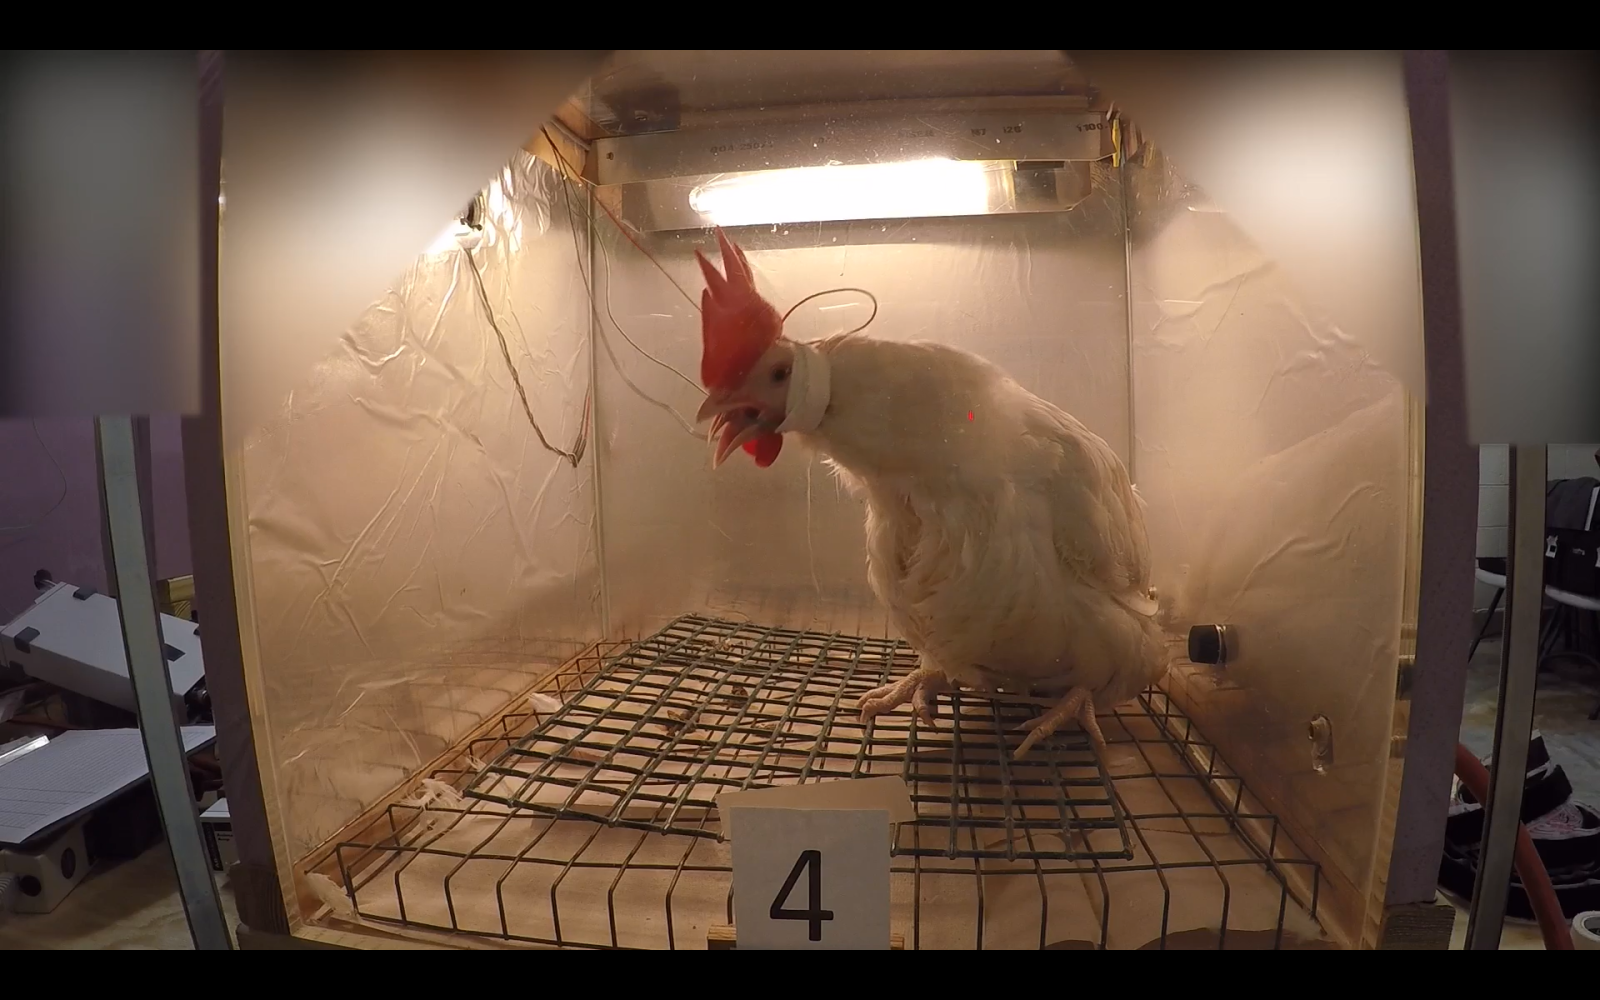 Chicken in a small see through box suffocating